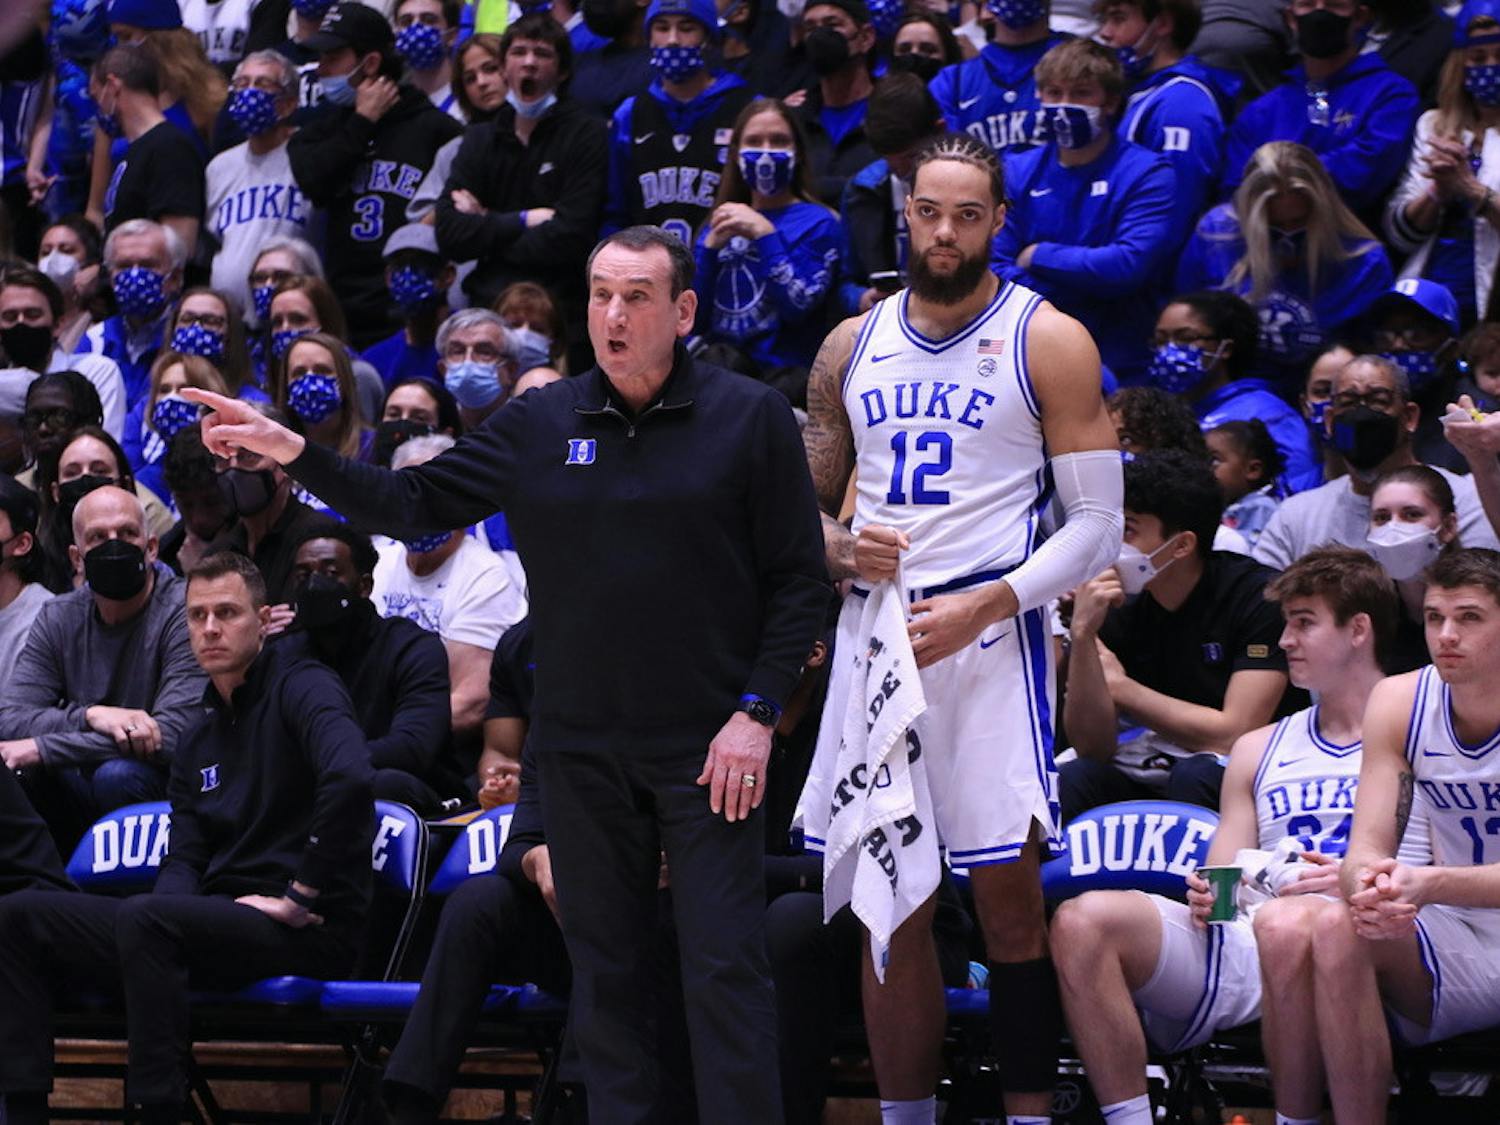 Duke pushed its winning streak to four games with victories against Wake Forest and Florida State.